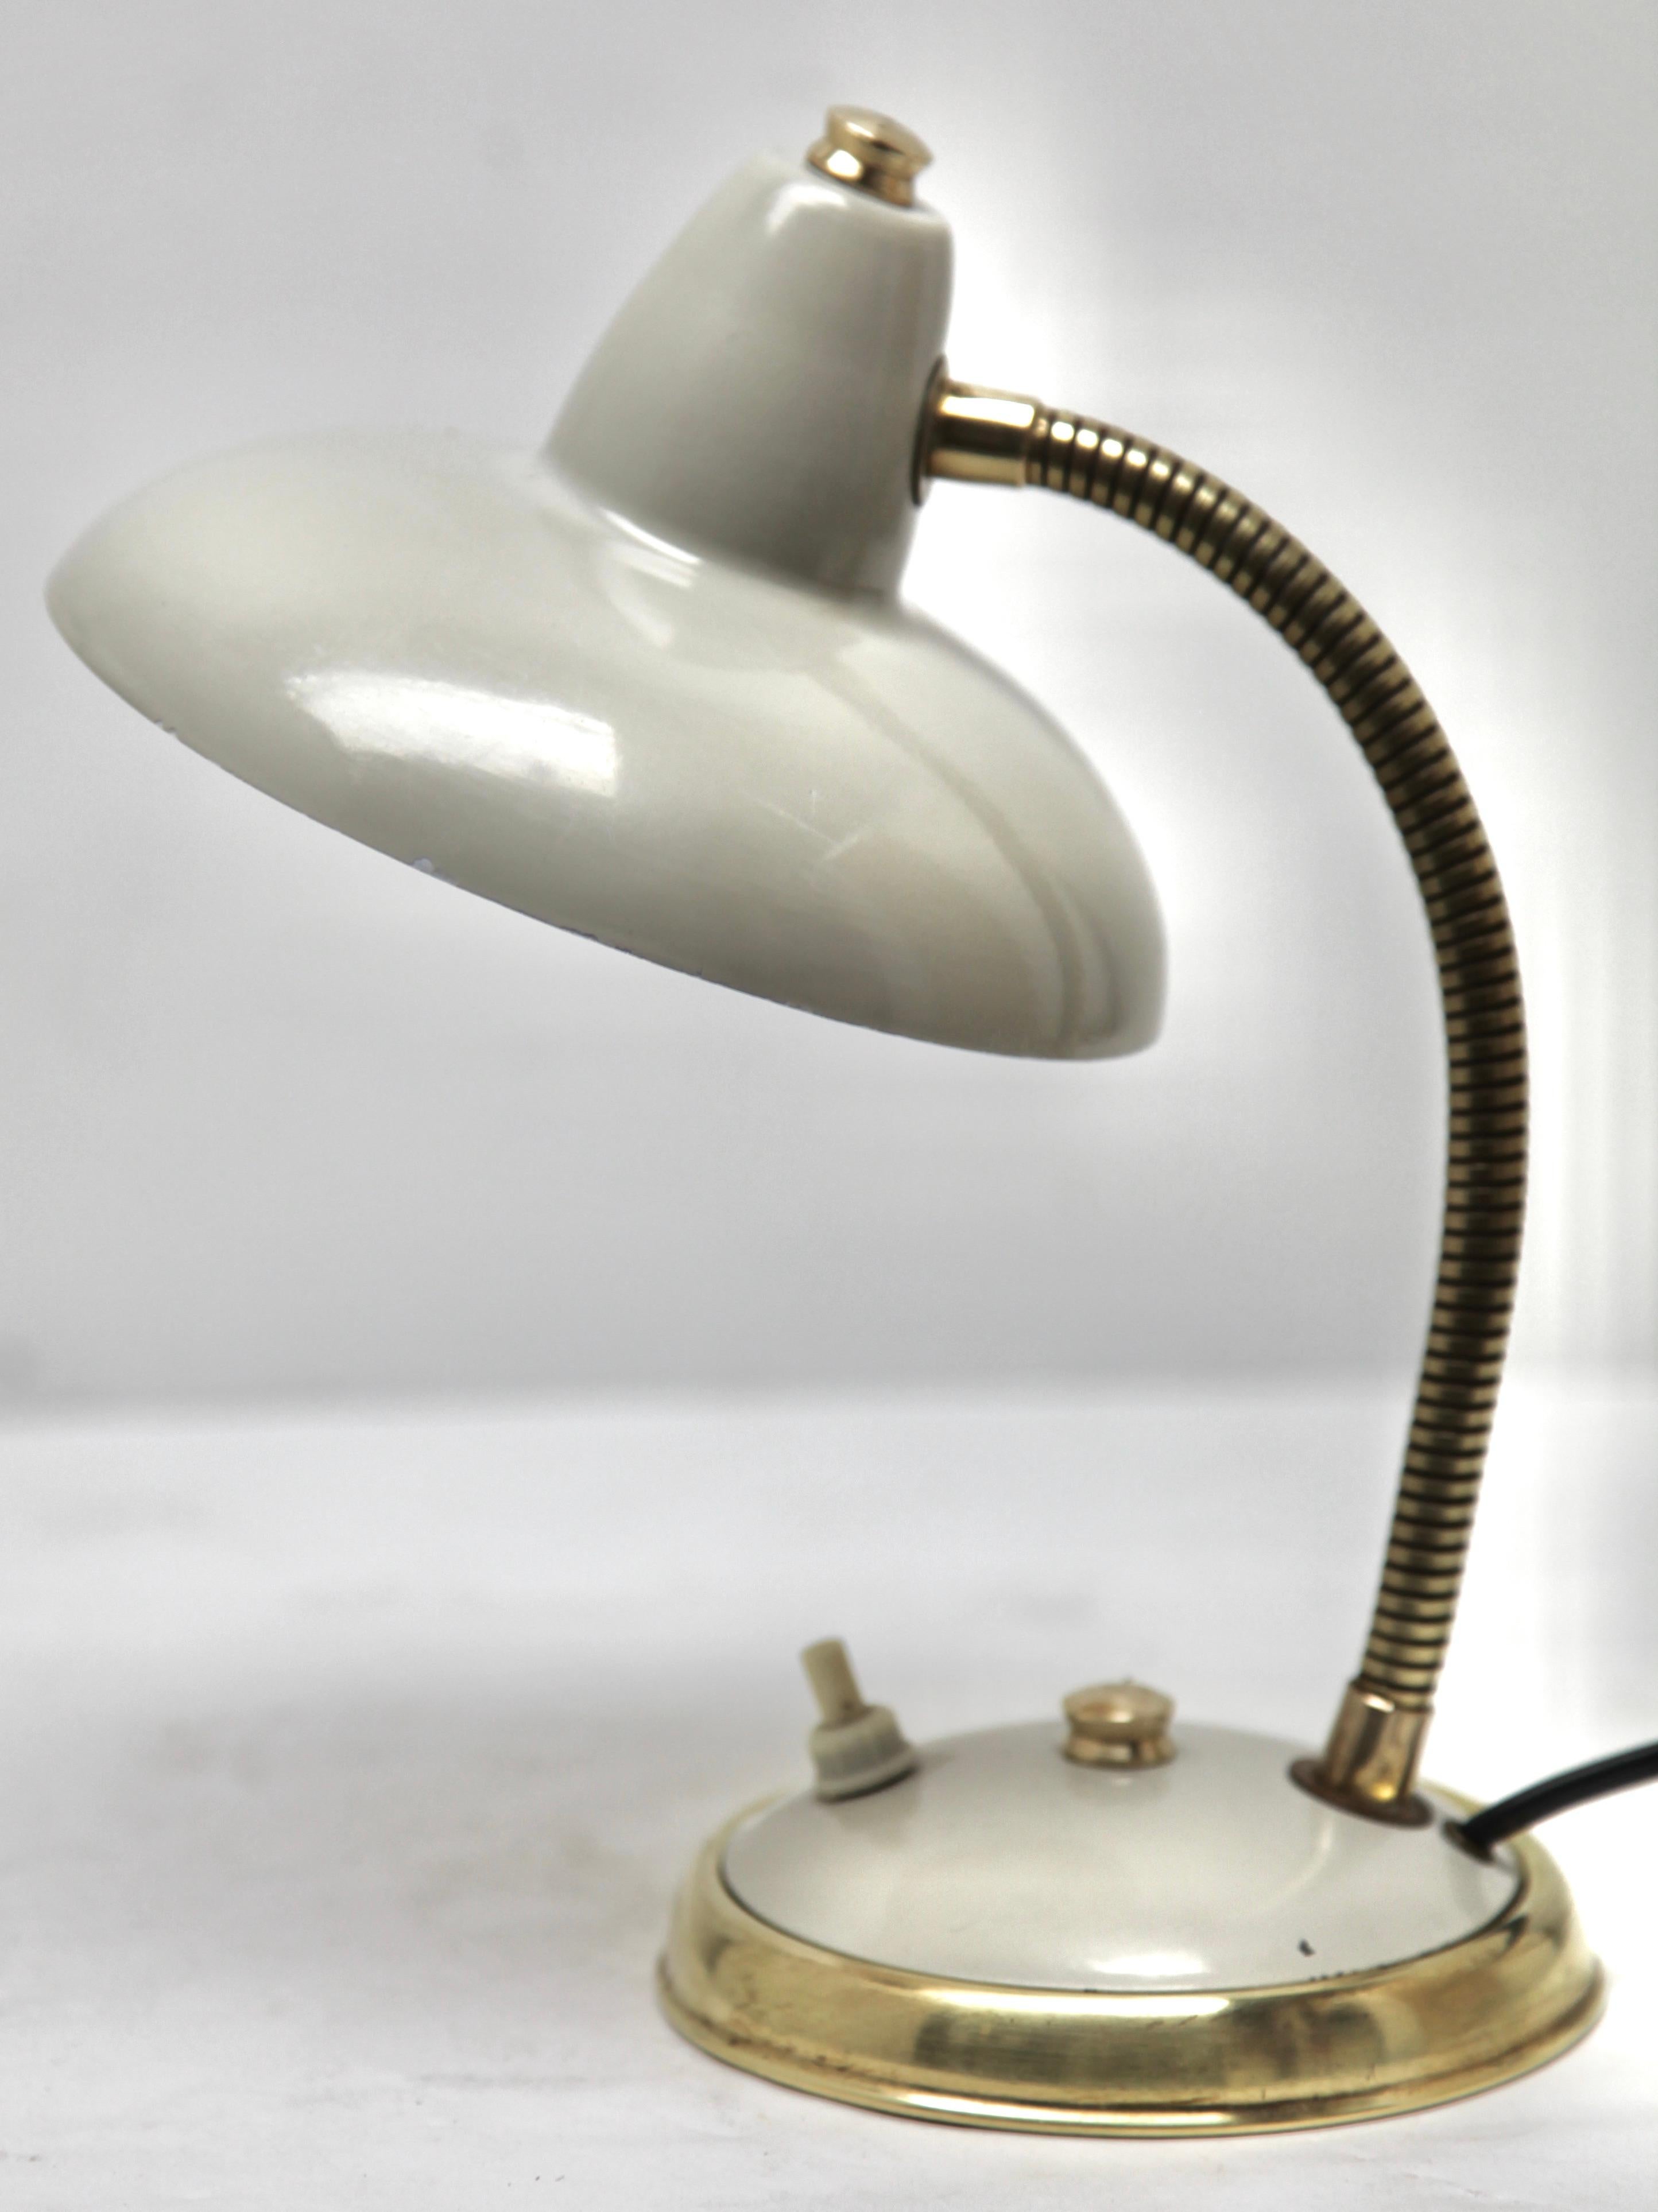 Aluminor lamp of the 1950s The lamps are in very good condition.
This adorable vintage lamp can be landed, on a desk, a bedside table, a piece of sofa etc. It is steerable from its reflector and the height can be adjusted. Piece of sofa etc. It is